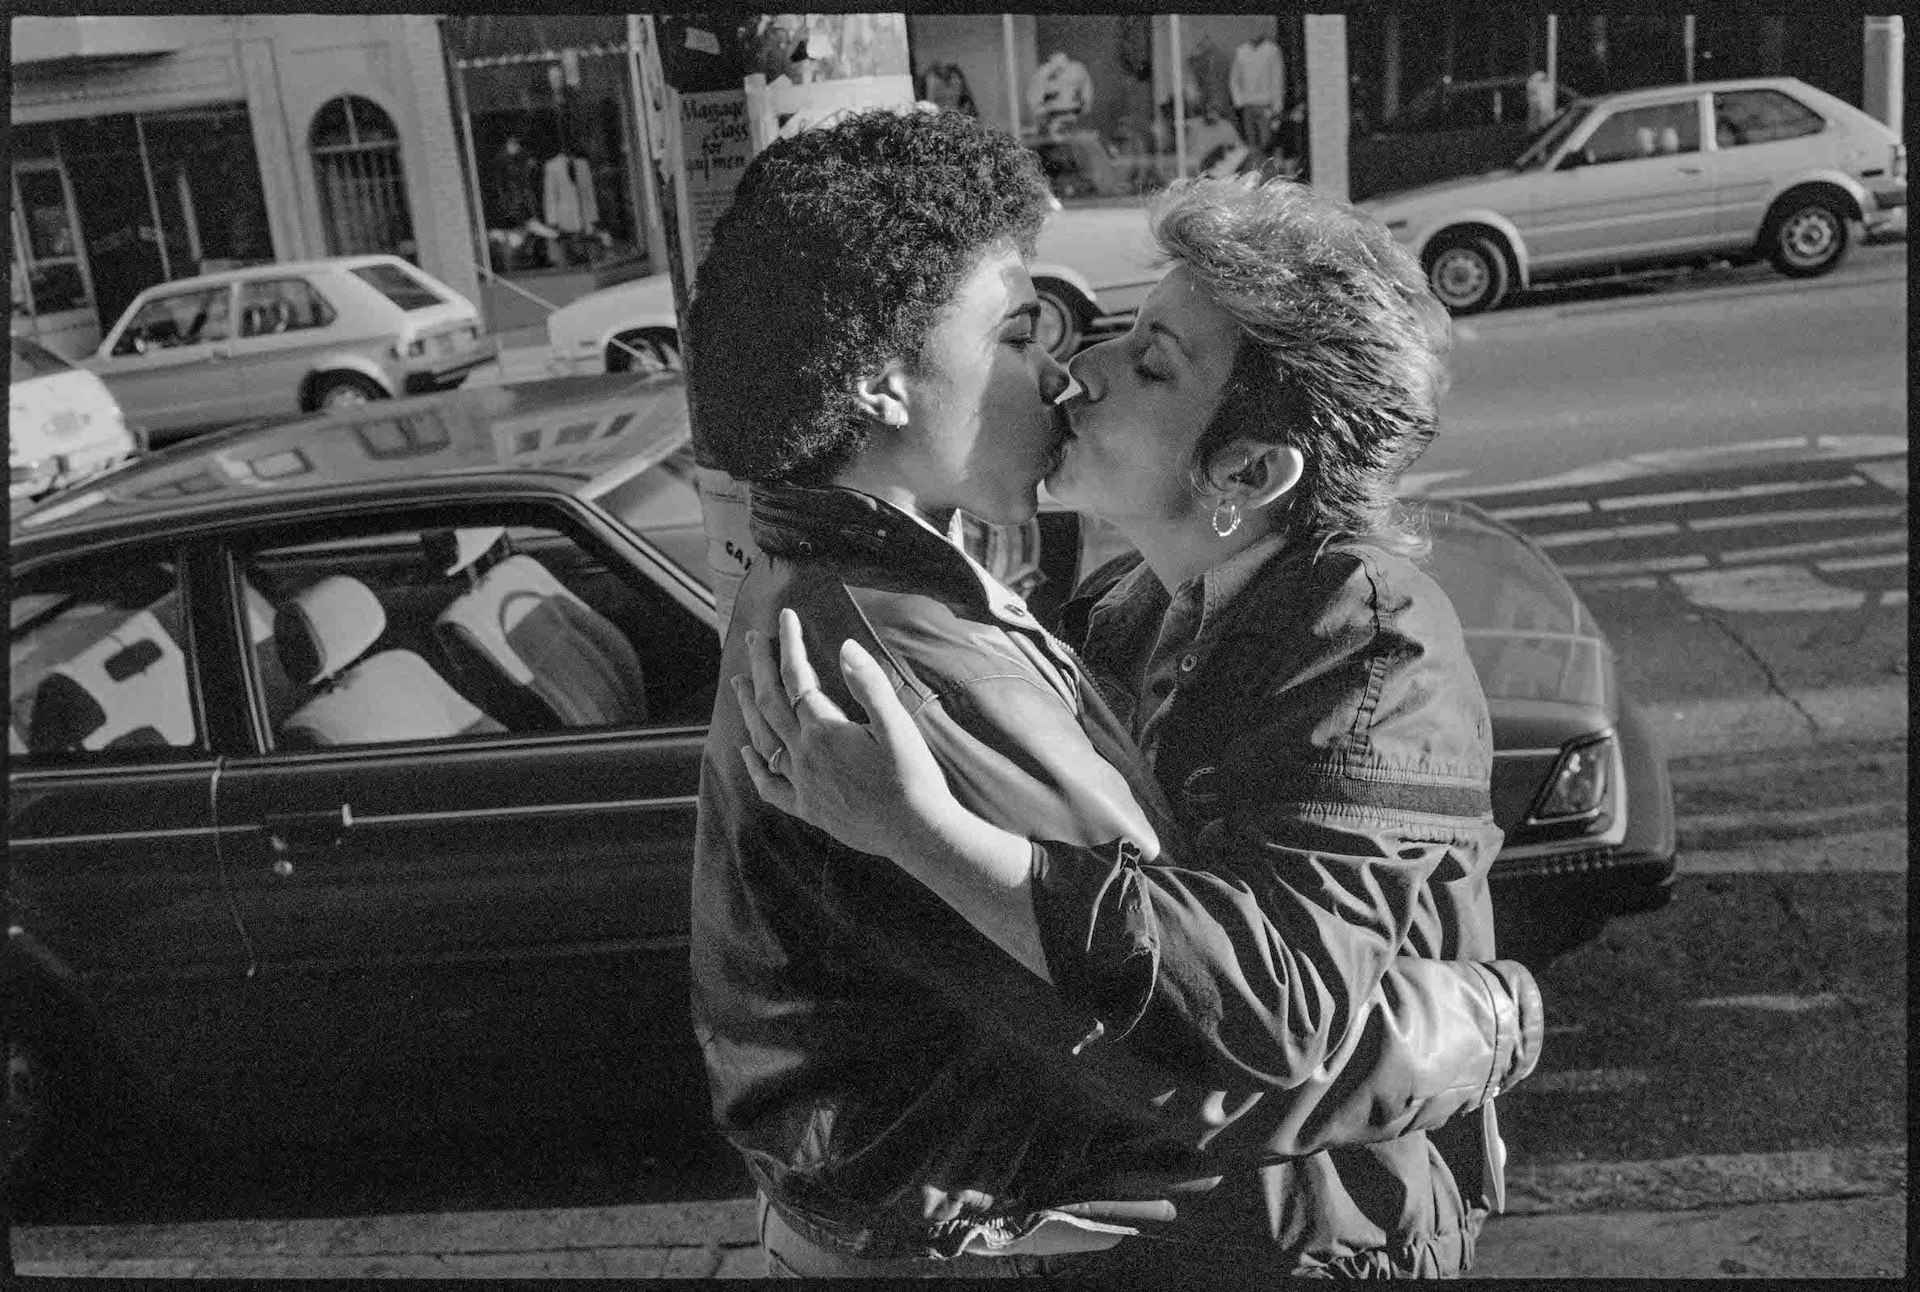 Documenting Gay power and Pride in 1980s America